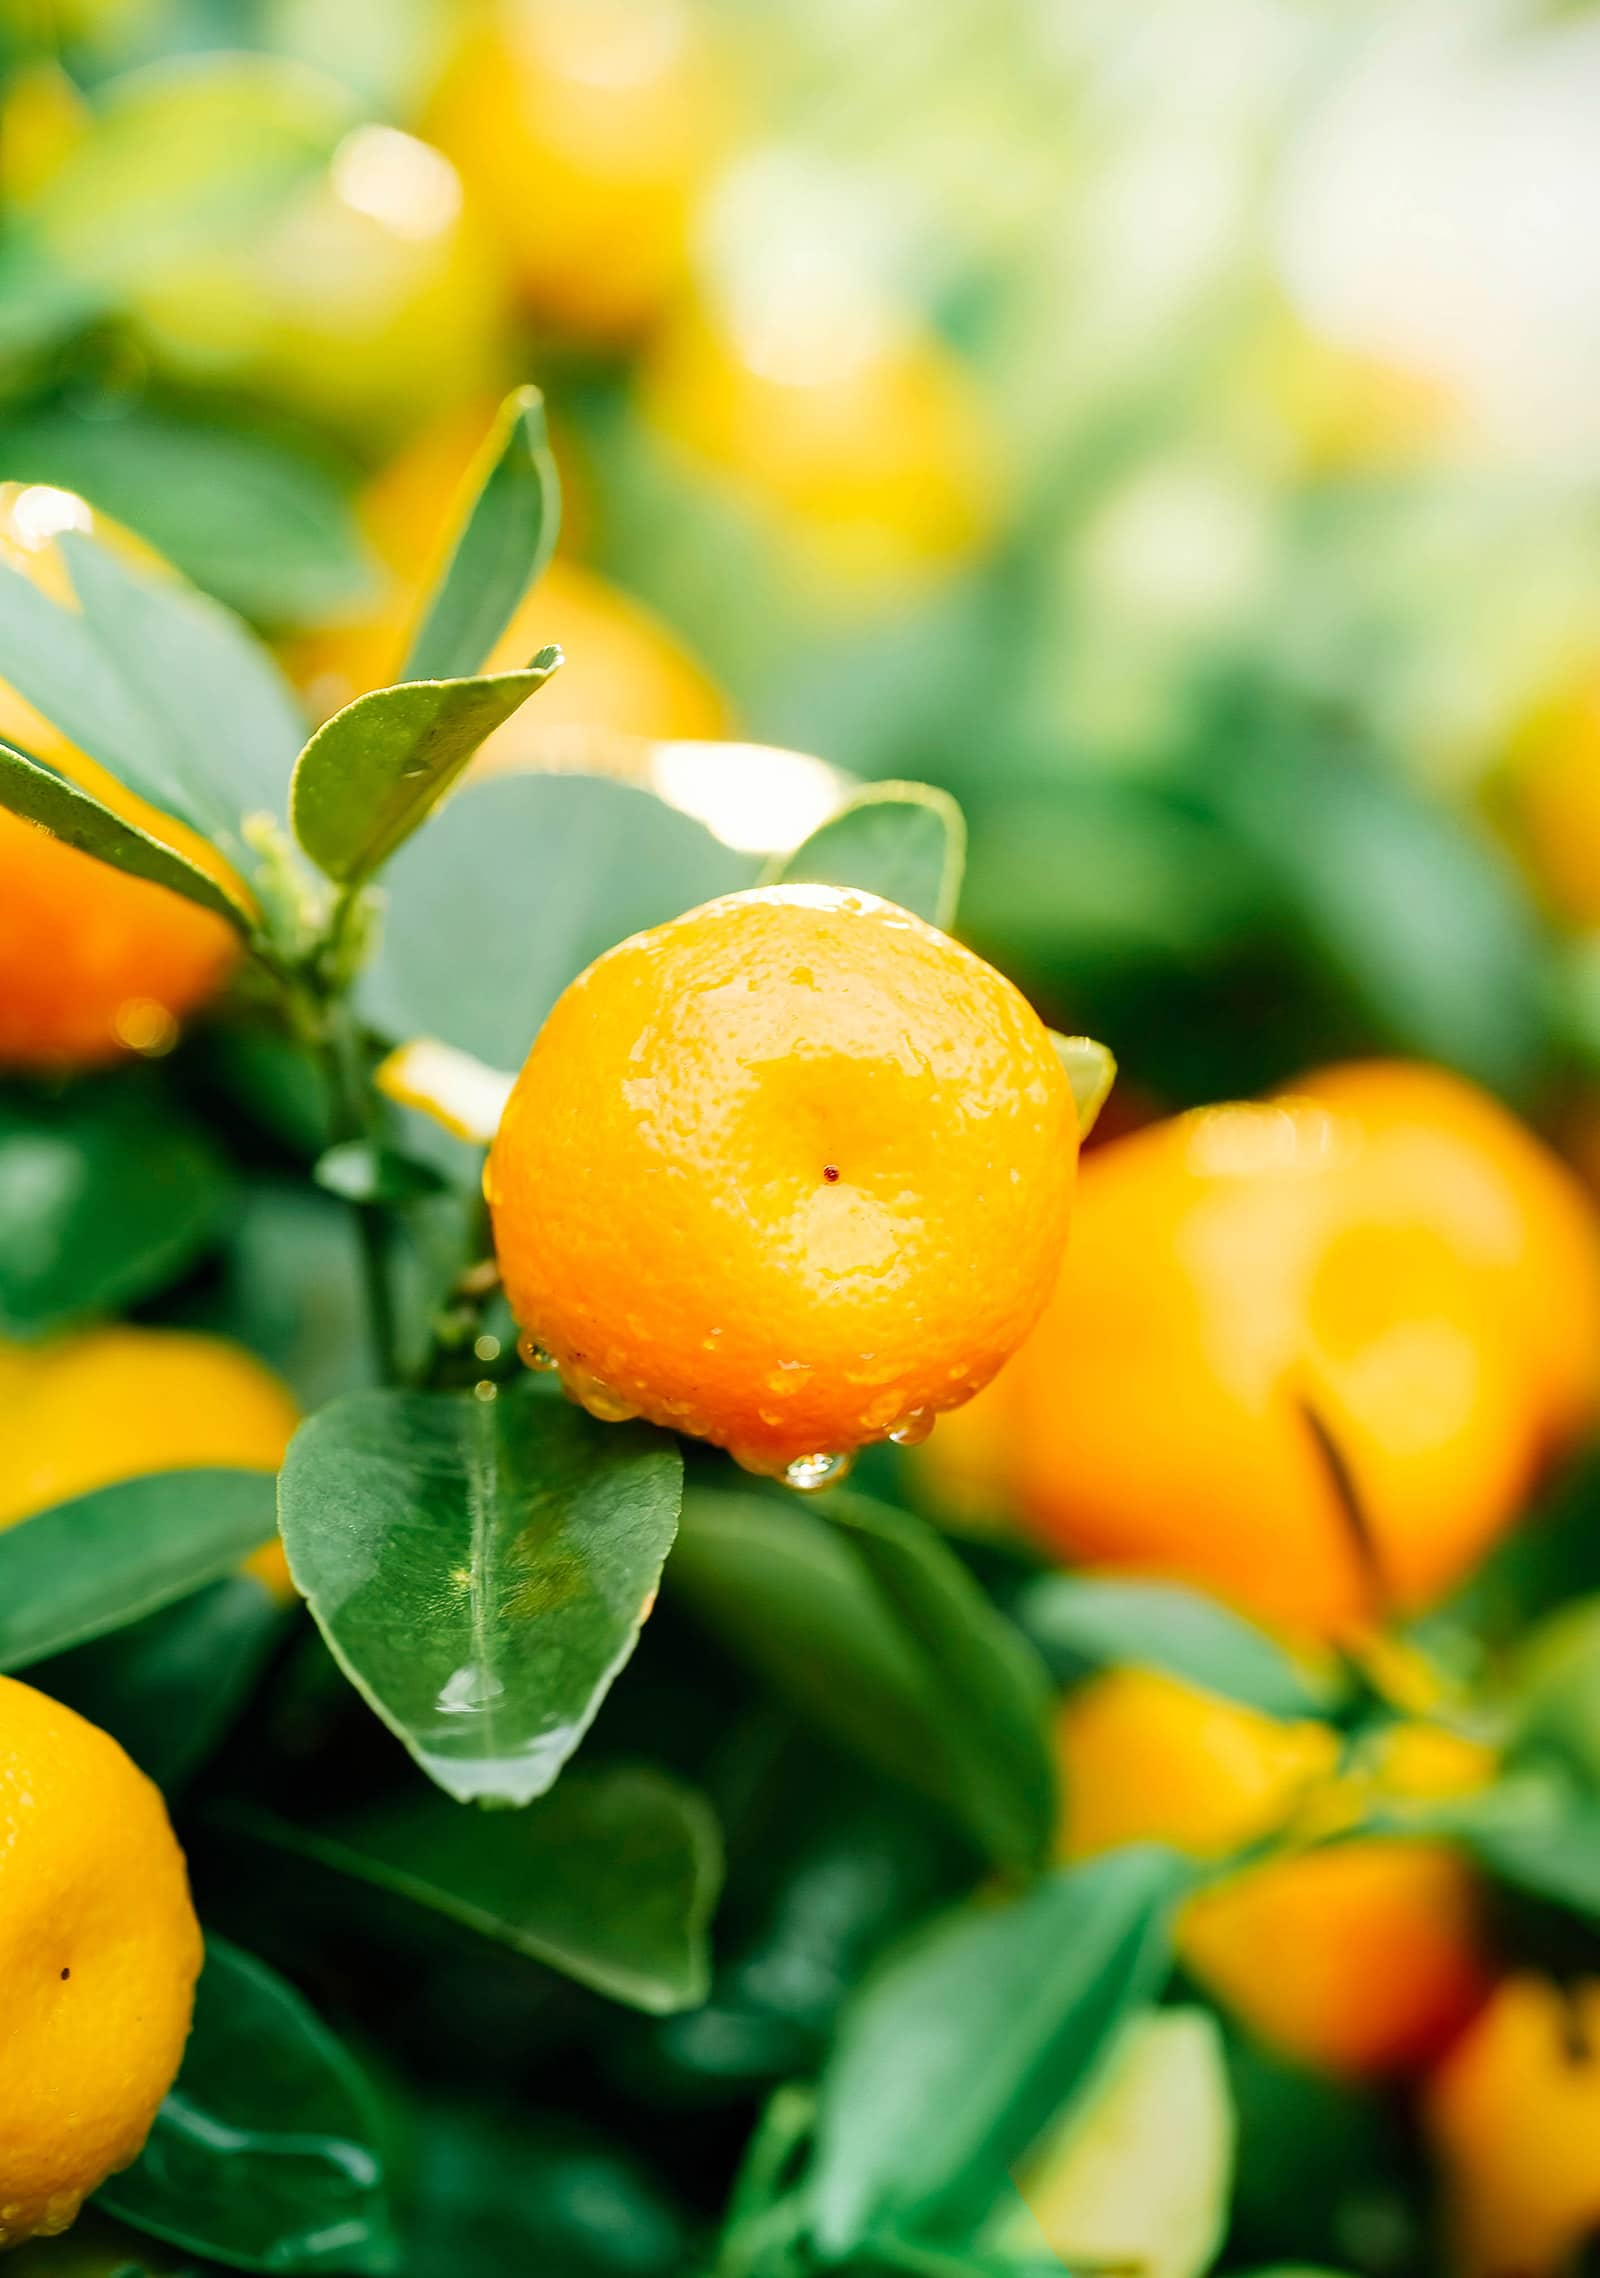 Here's the difference between mandarin oranges vs. clementines